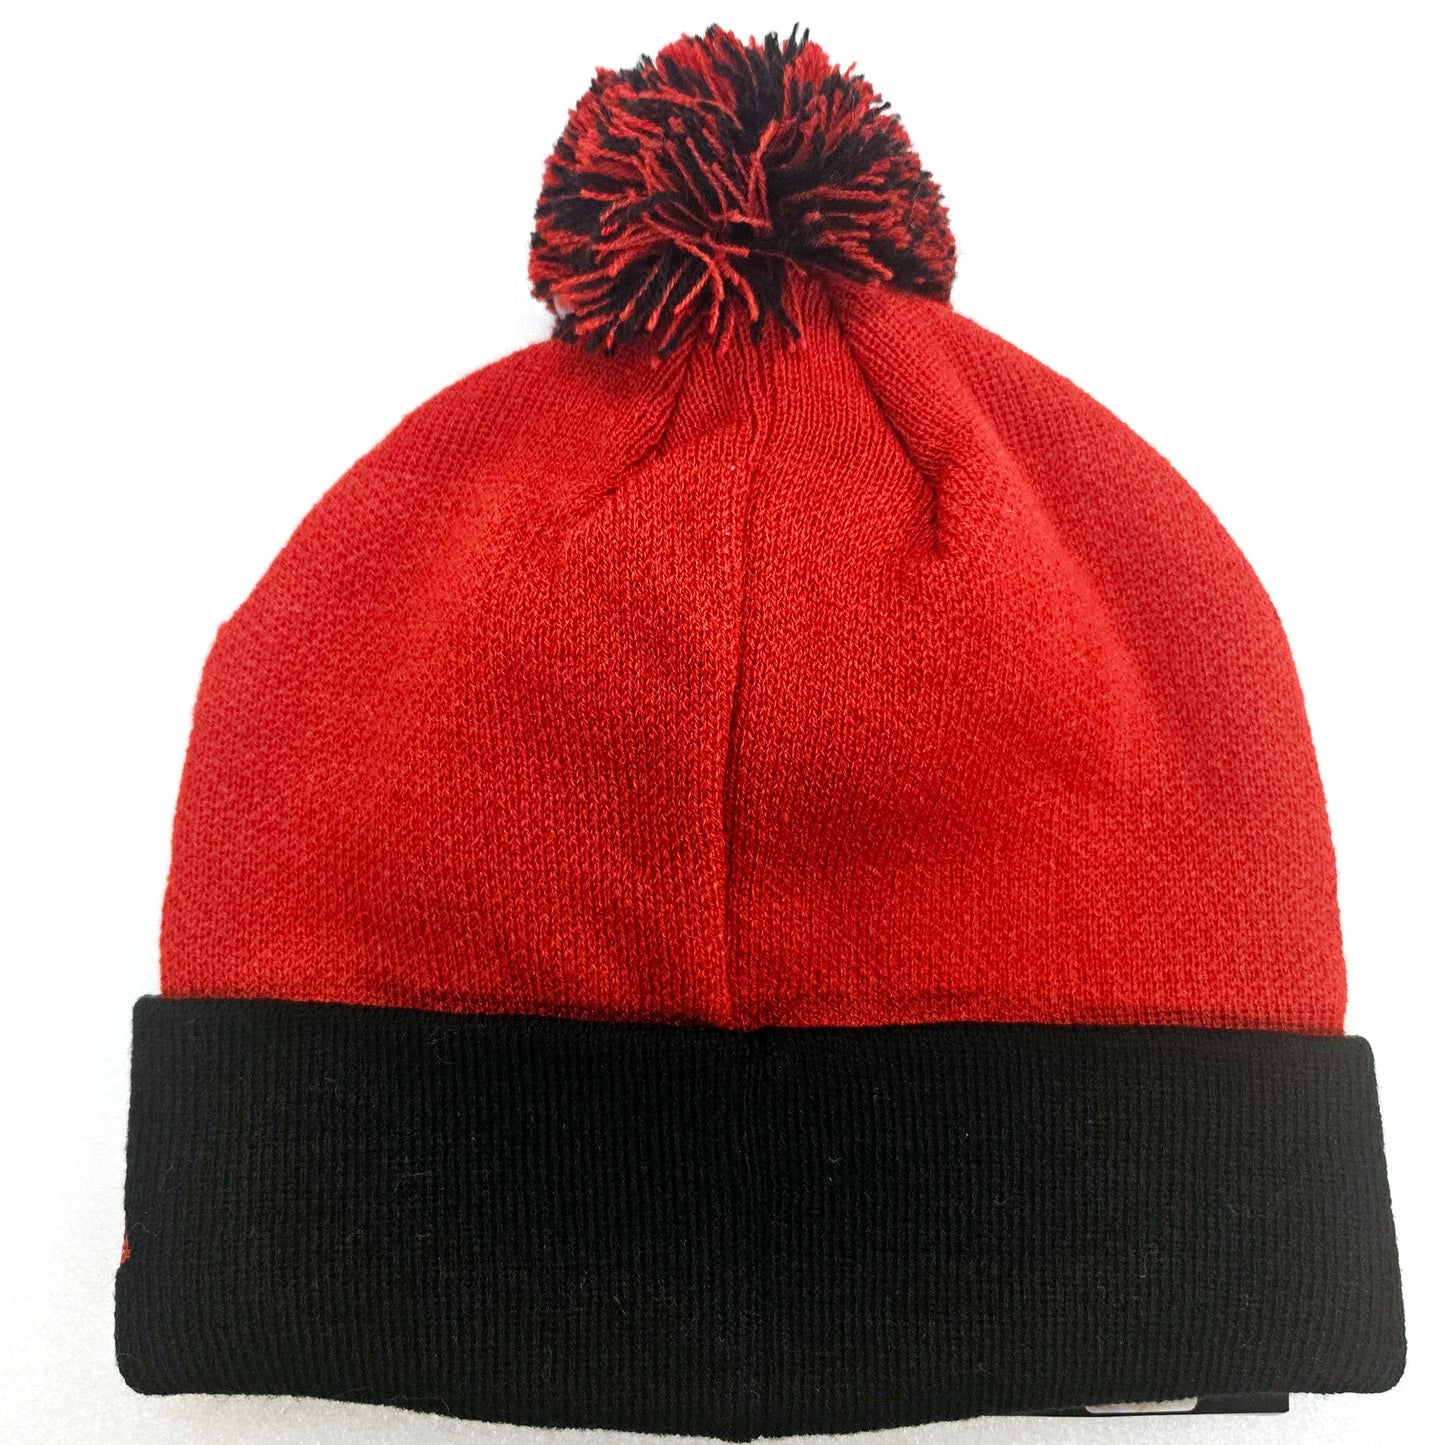 New Era NHL Detroit Red Wings Cuffed Knit Hat with Pom